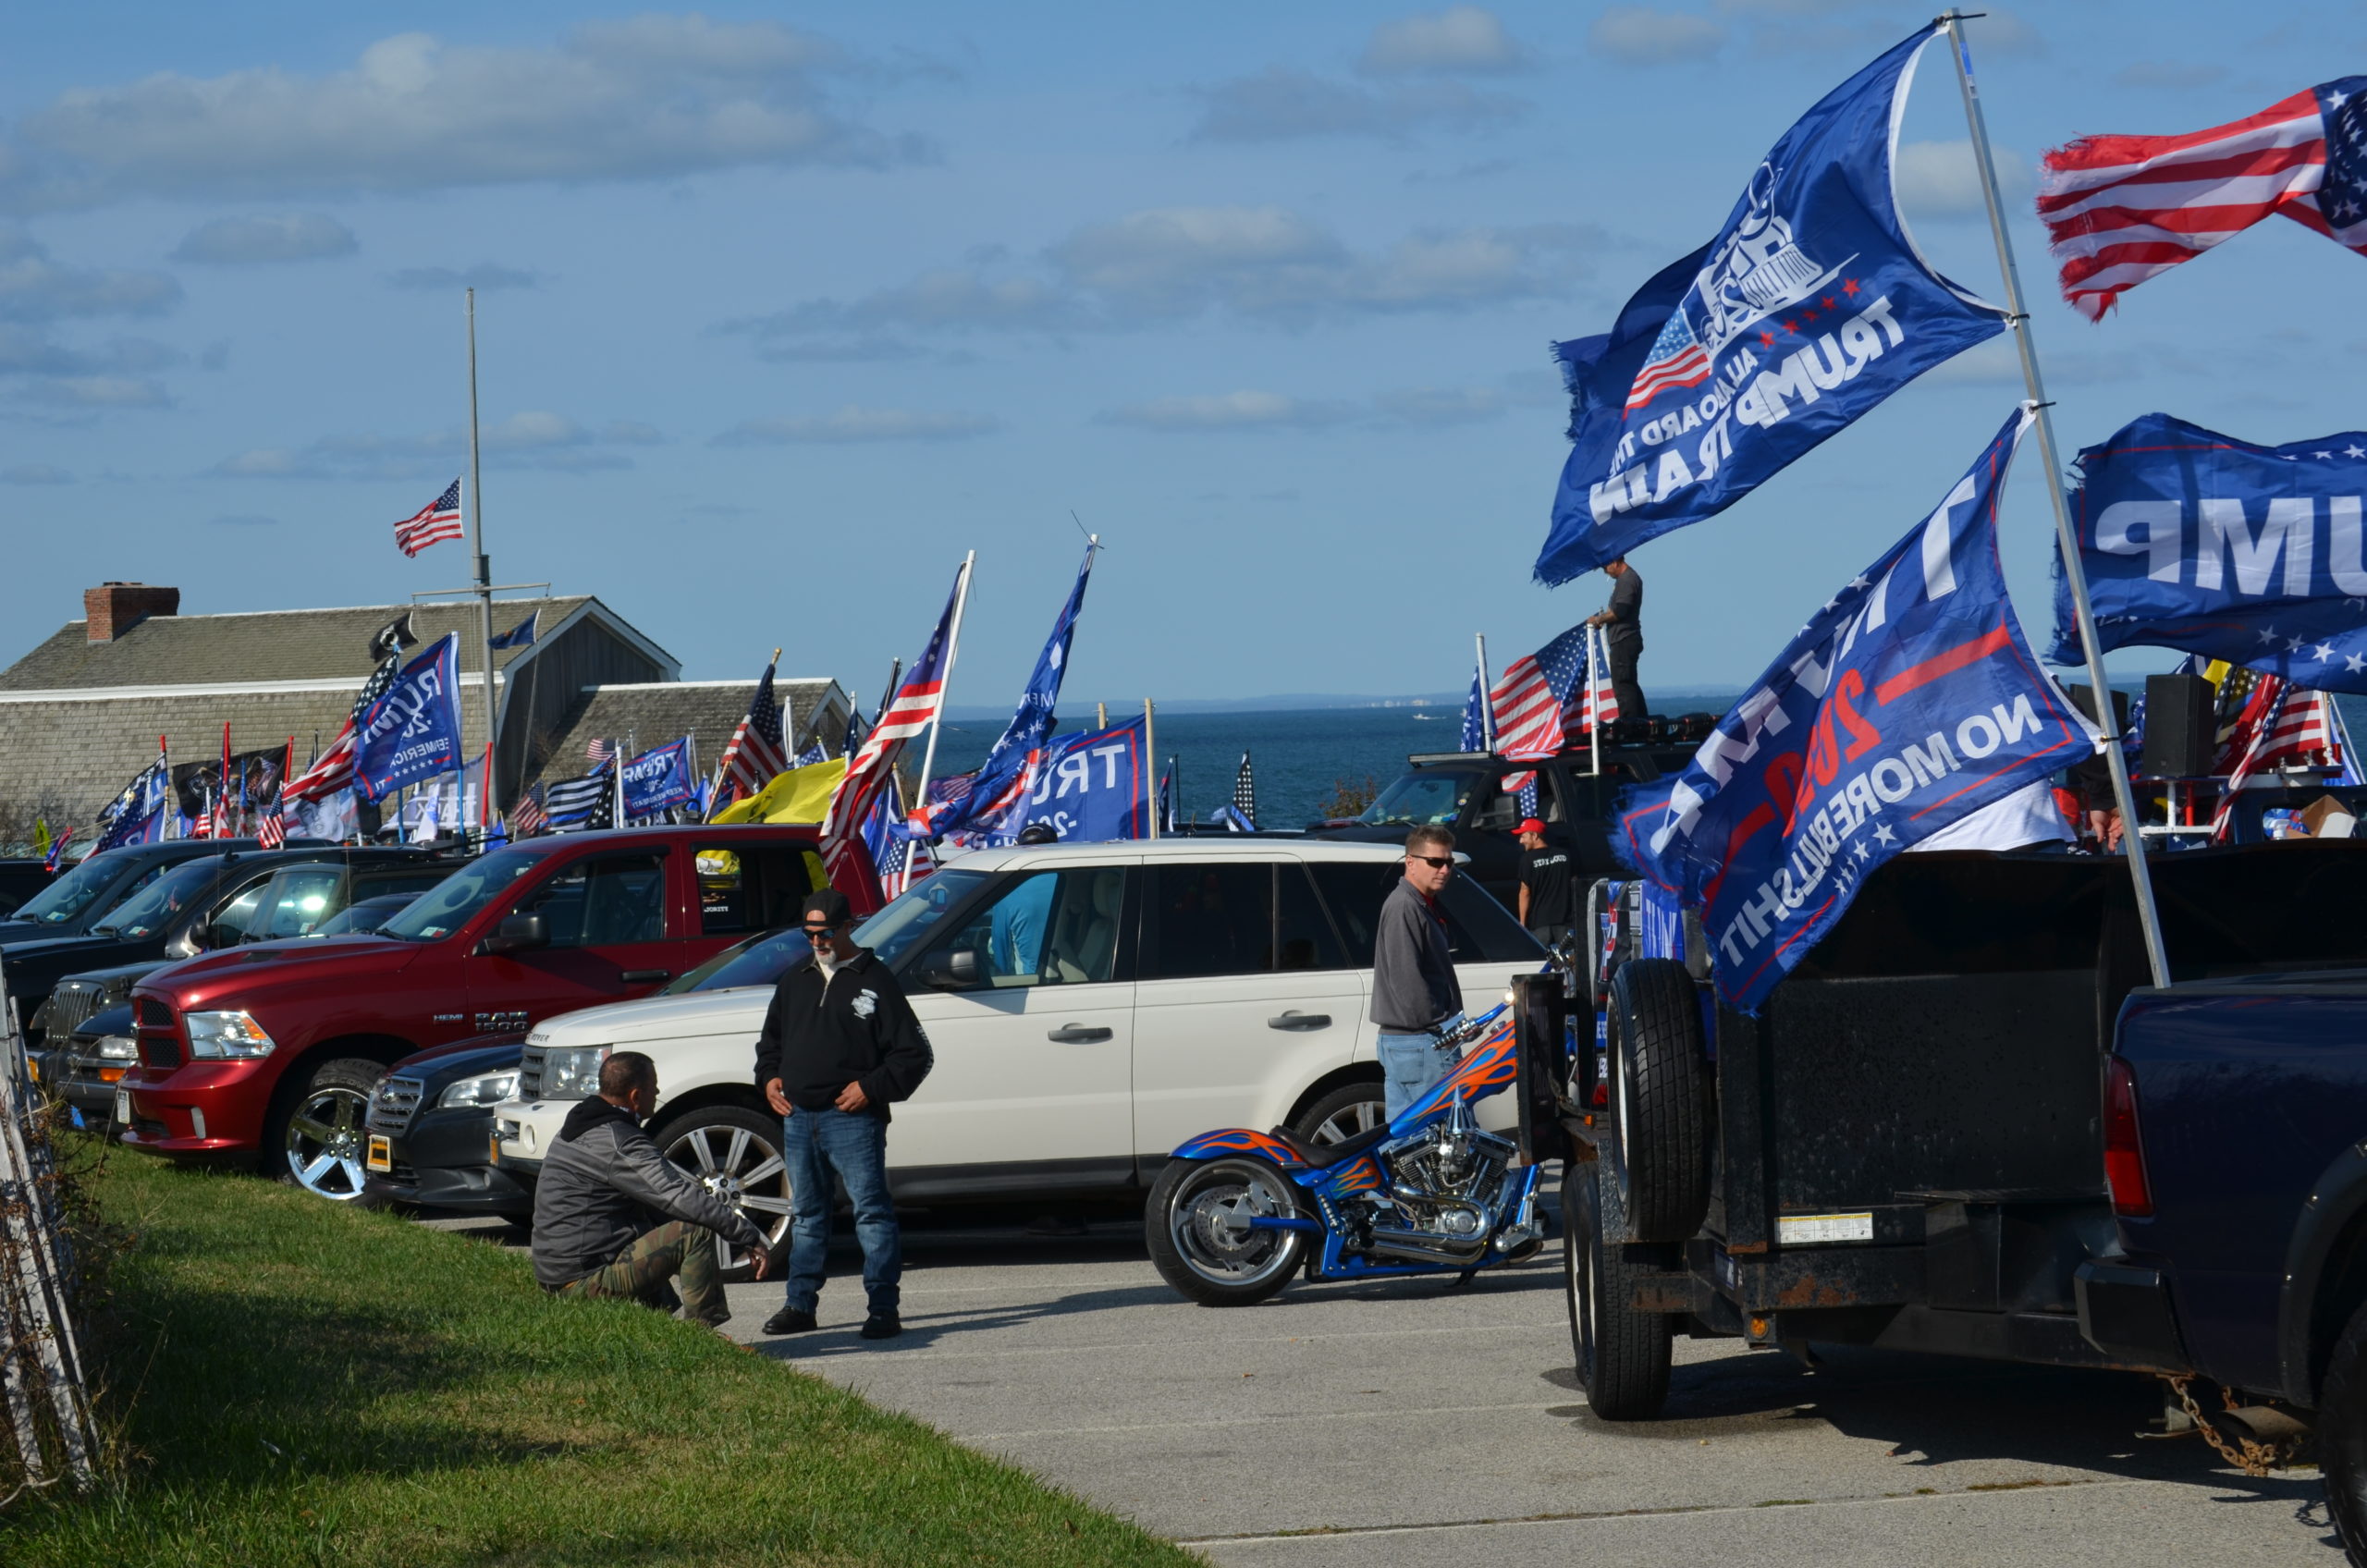 The parking lots at the Montauk lighthouse were filled as parade attendees reached the end of the route.